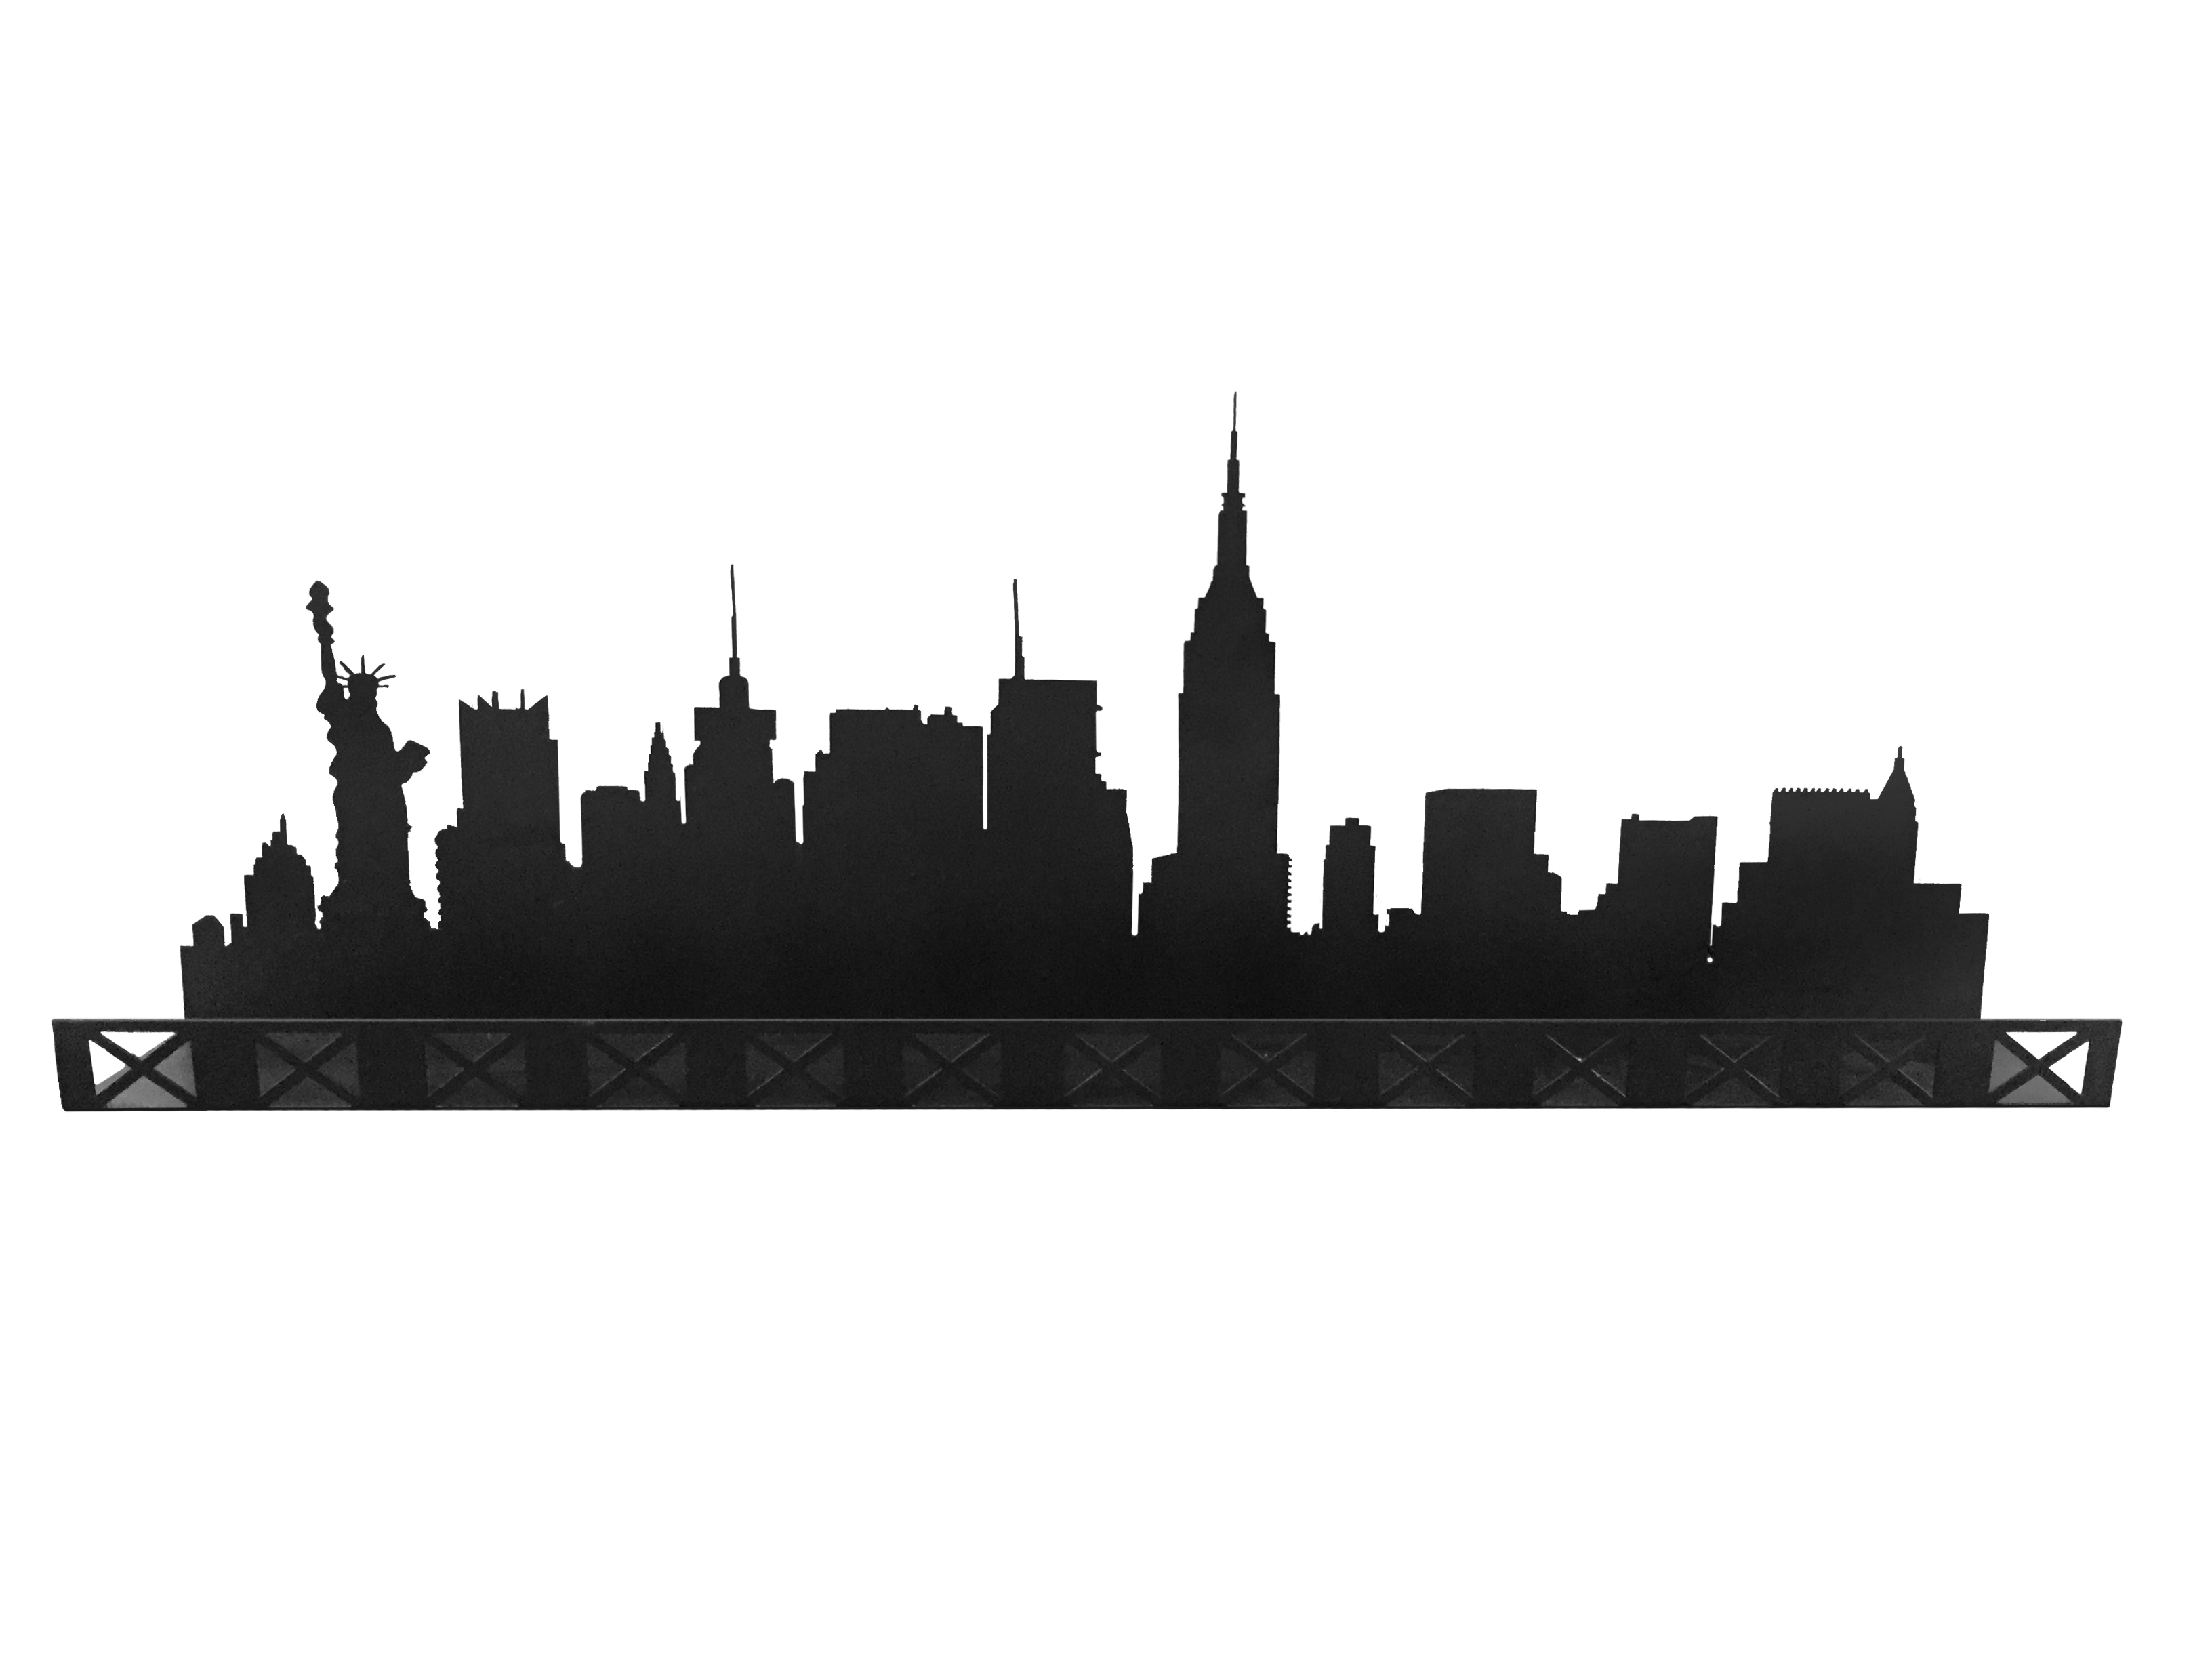 New York City Silhouette PNG HD Image